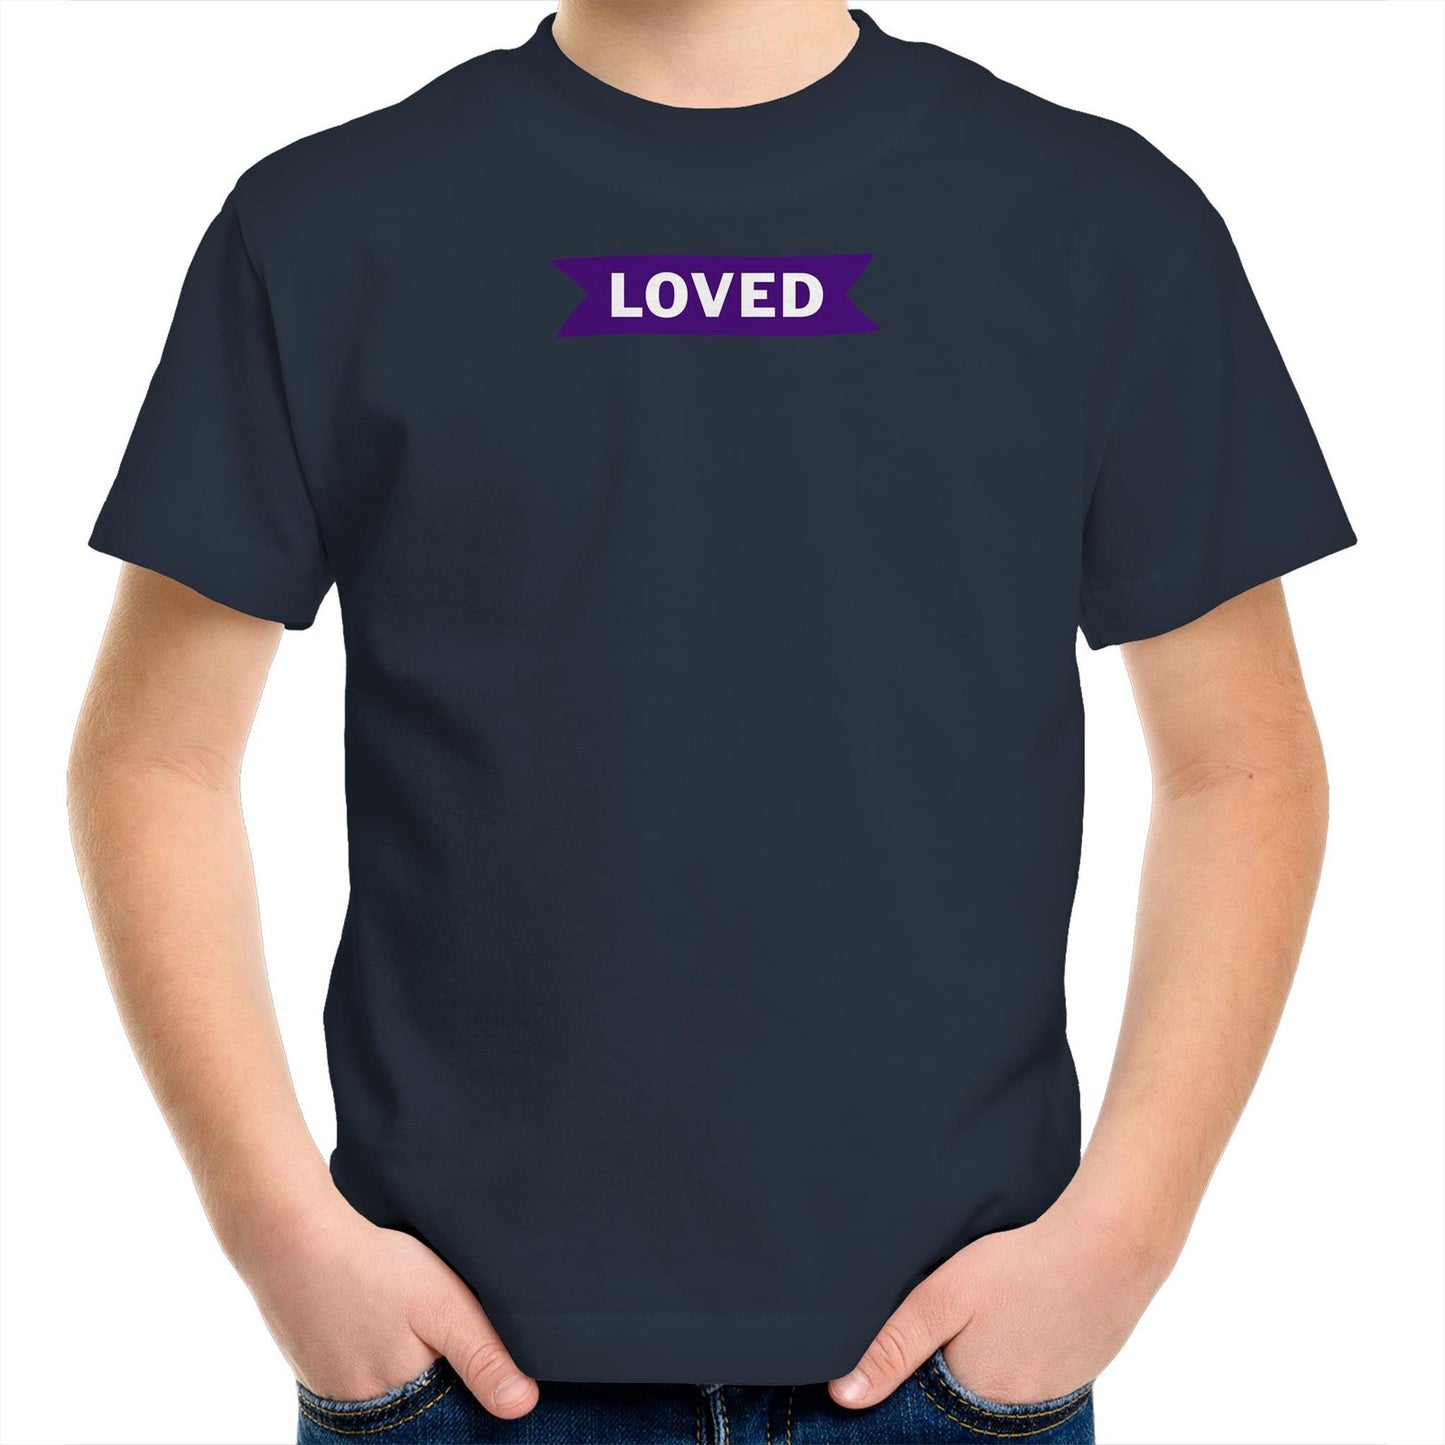 Loved T Shirts for Kids